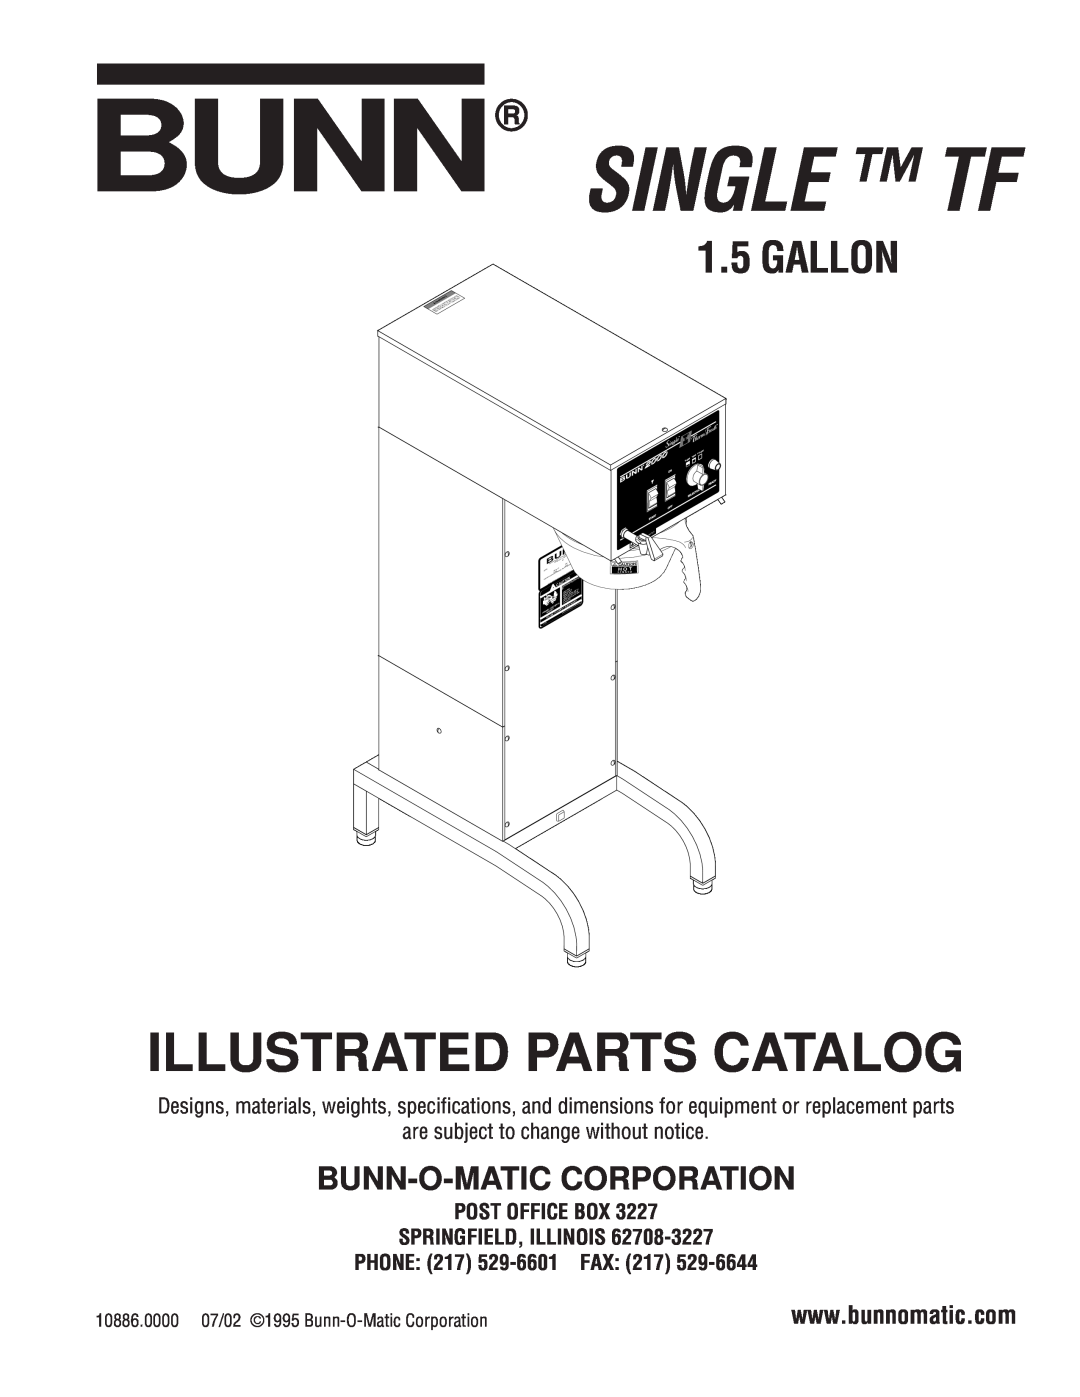 Bunn 1.5 GALLON manual Tf Server, 1.0 & 1.5 Gallon, Use & Care Information, Discontinued Version, With & Without Base 